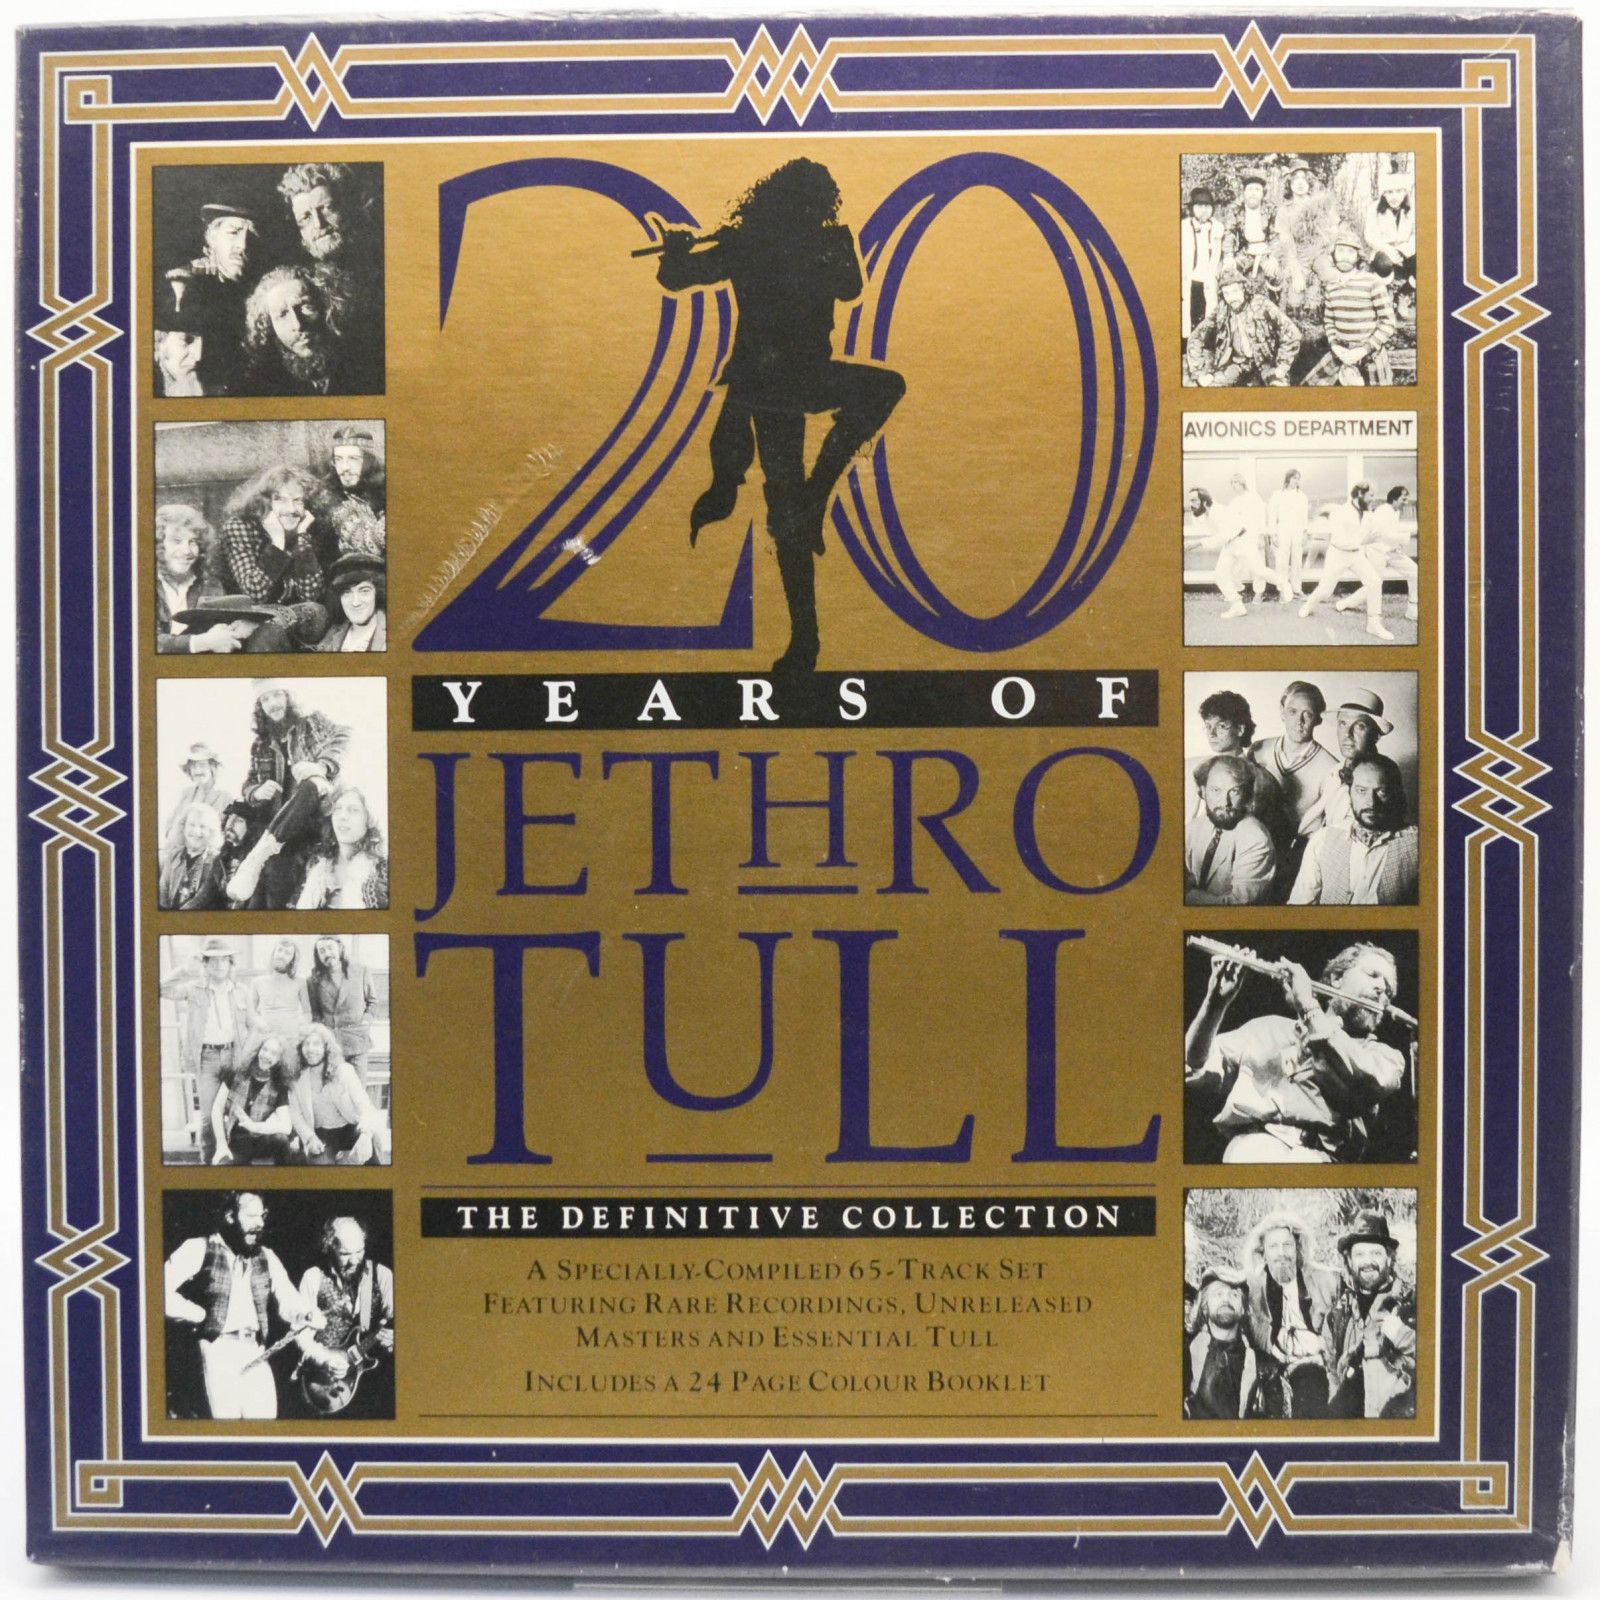 Jethro Tull — 20 Years Of Jethro Tull - The Definitive Collection (5LP, Box-set), 1988